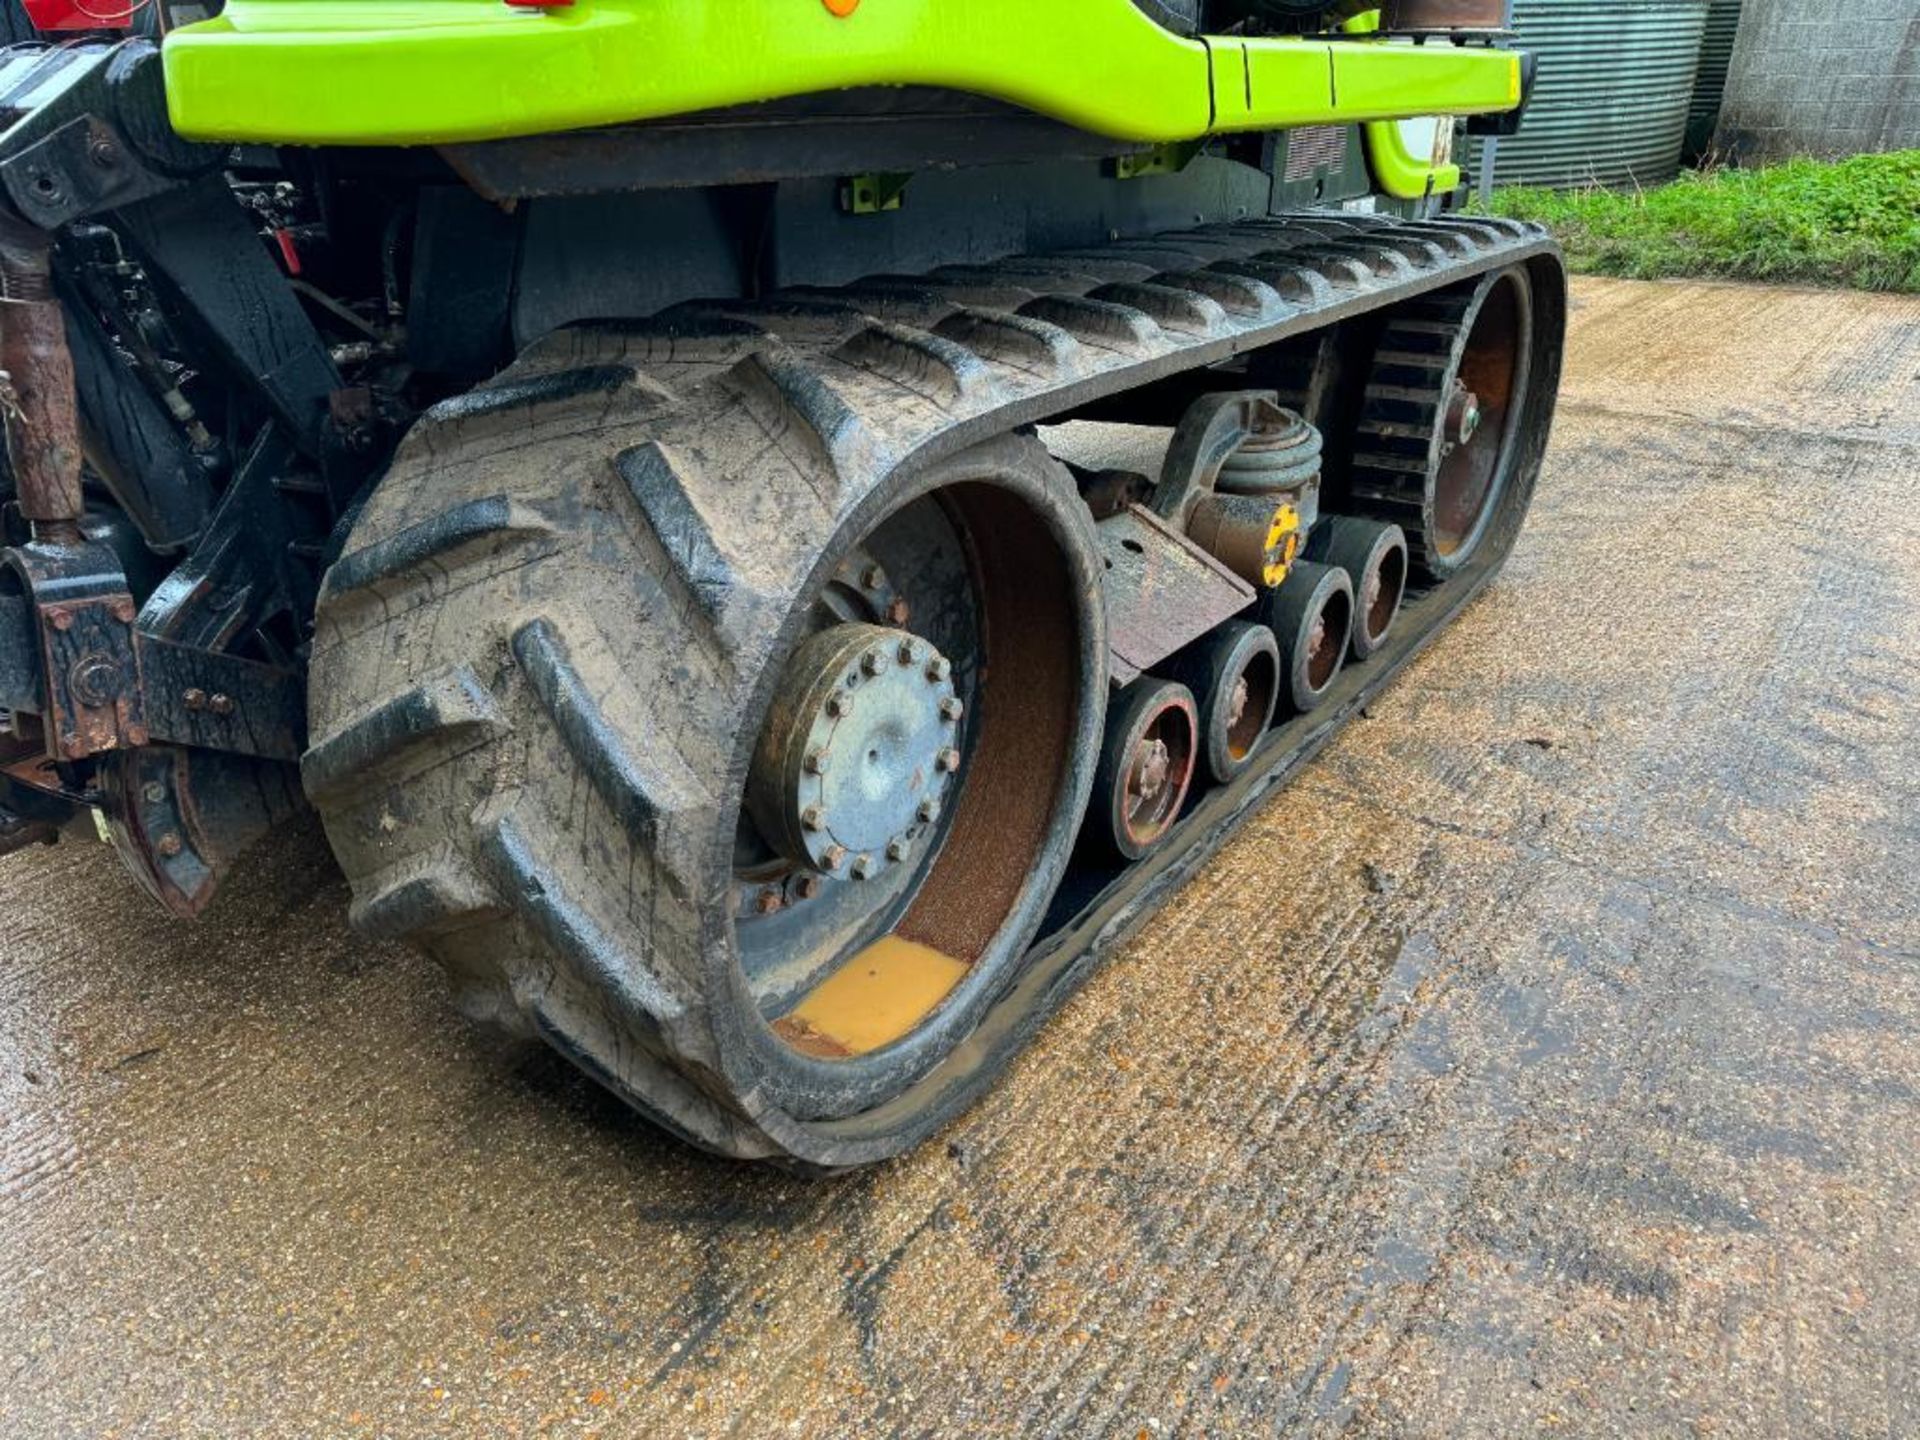 2001 Claas 75E Challenger rubber tracked crawler with 30" tracks, 20No 45kg front wafer weights, 4 m - Bild 11 aus 26